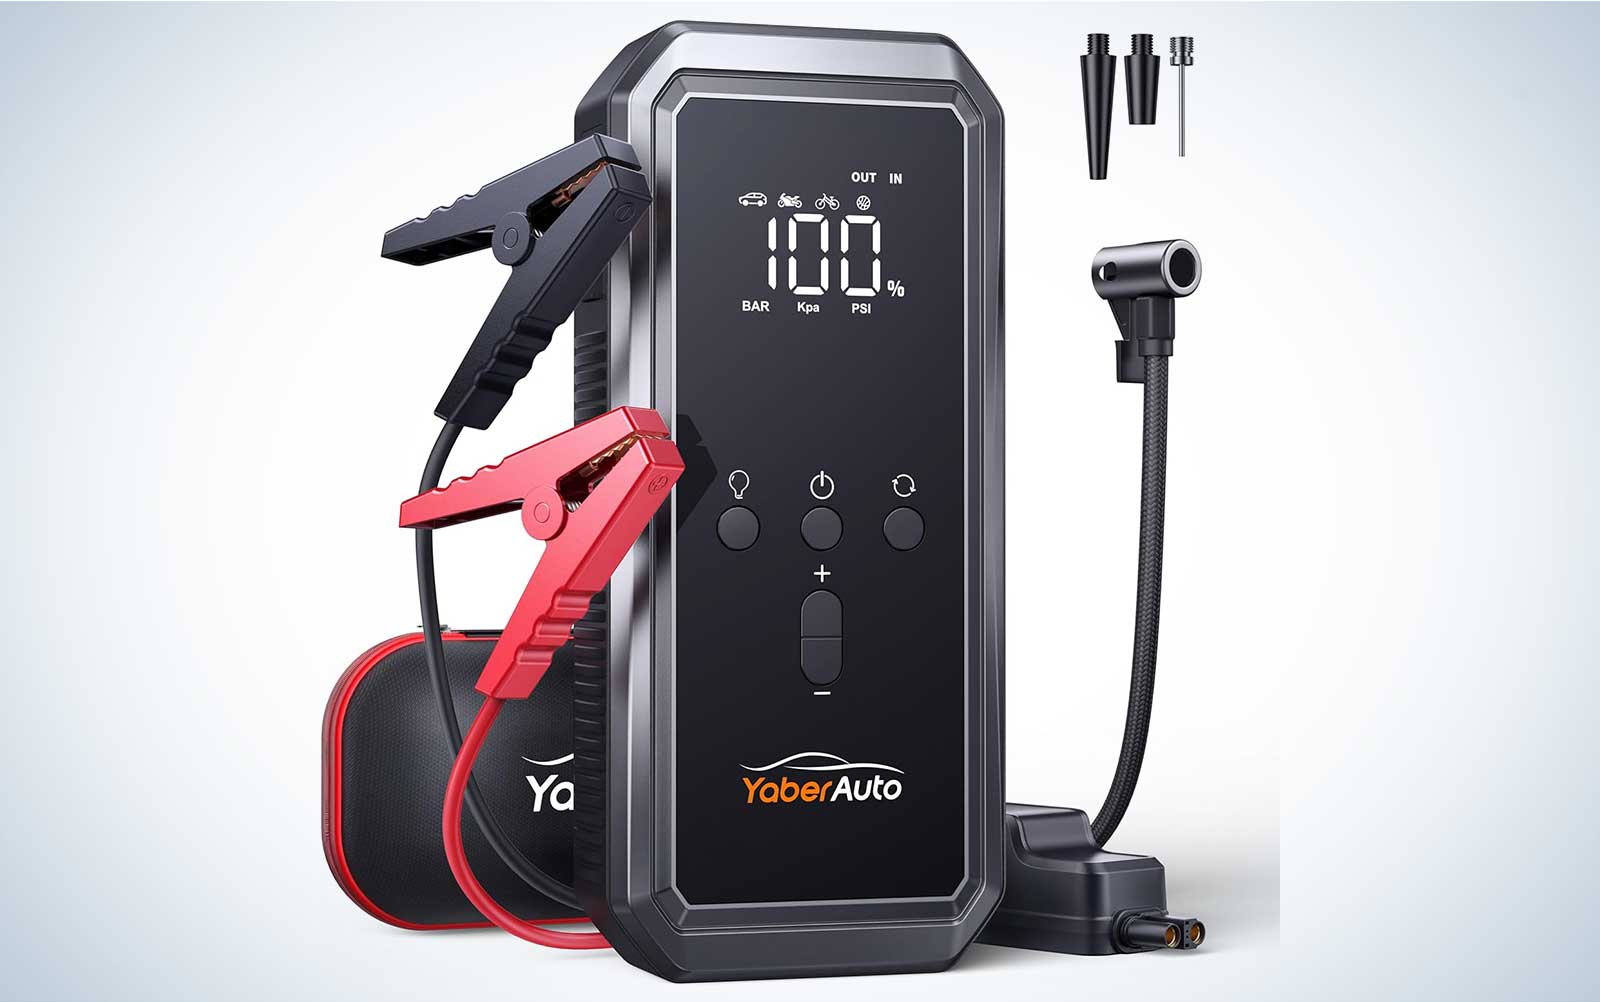 Yaber Auto car jump starter on a plain background with its accessories